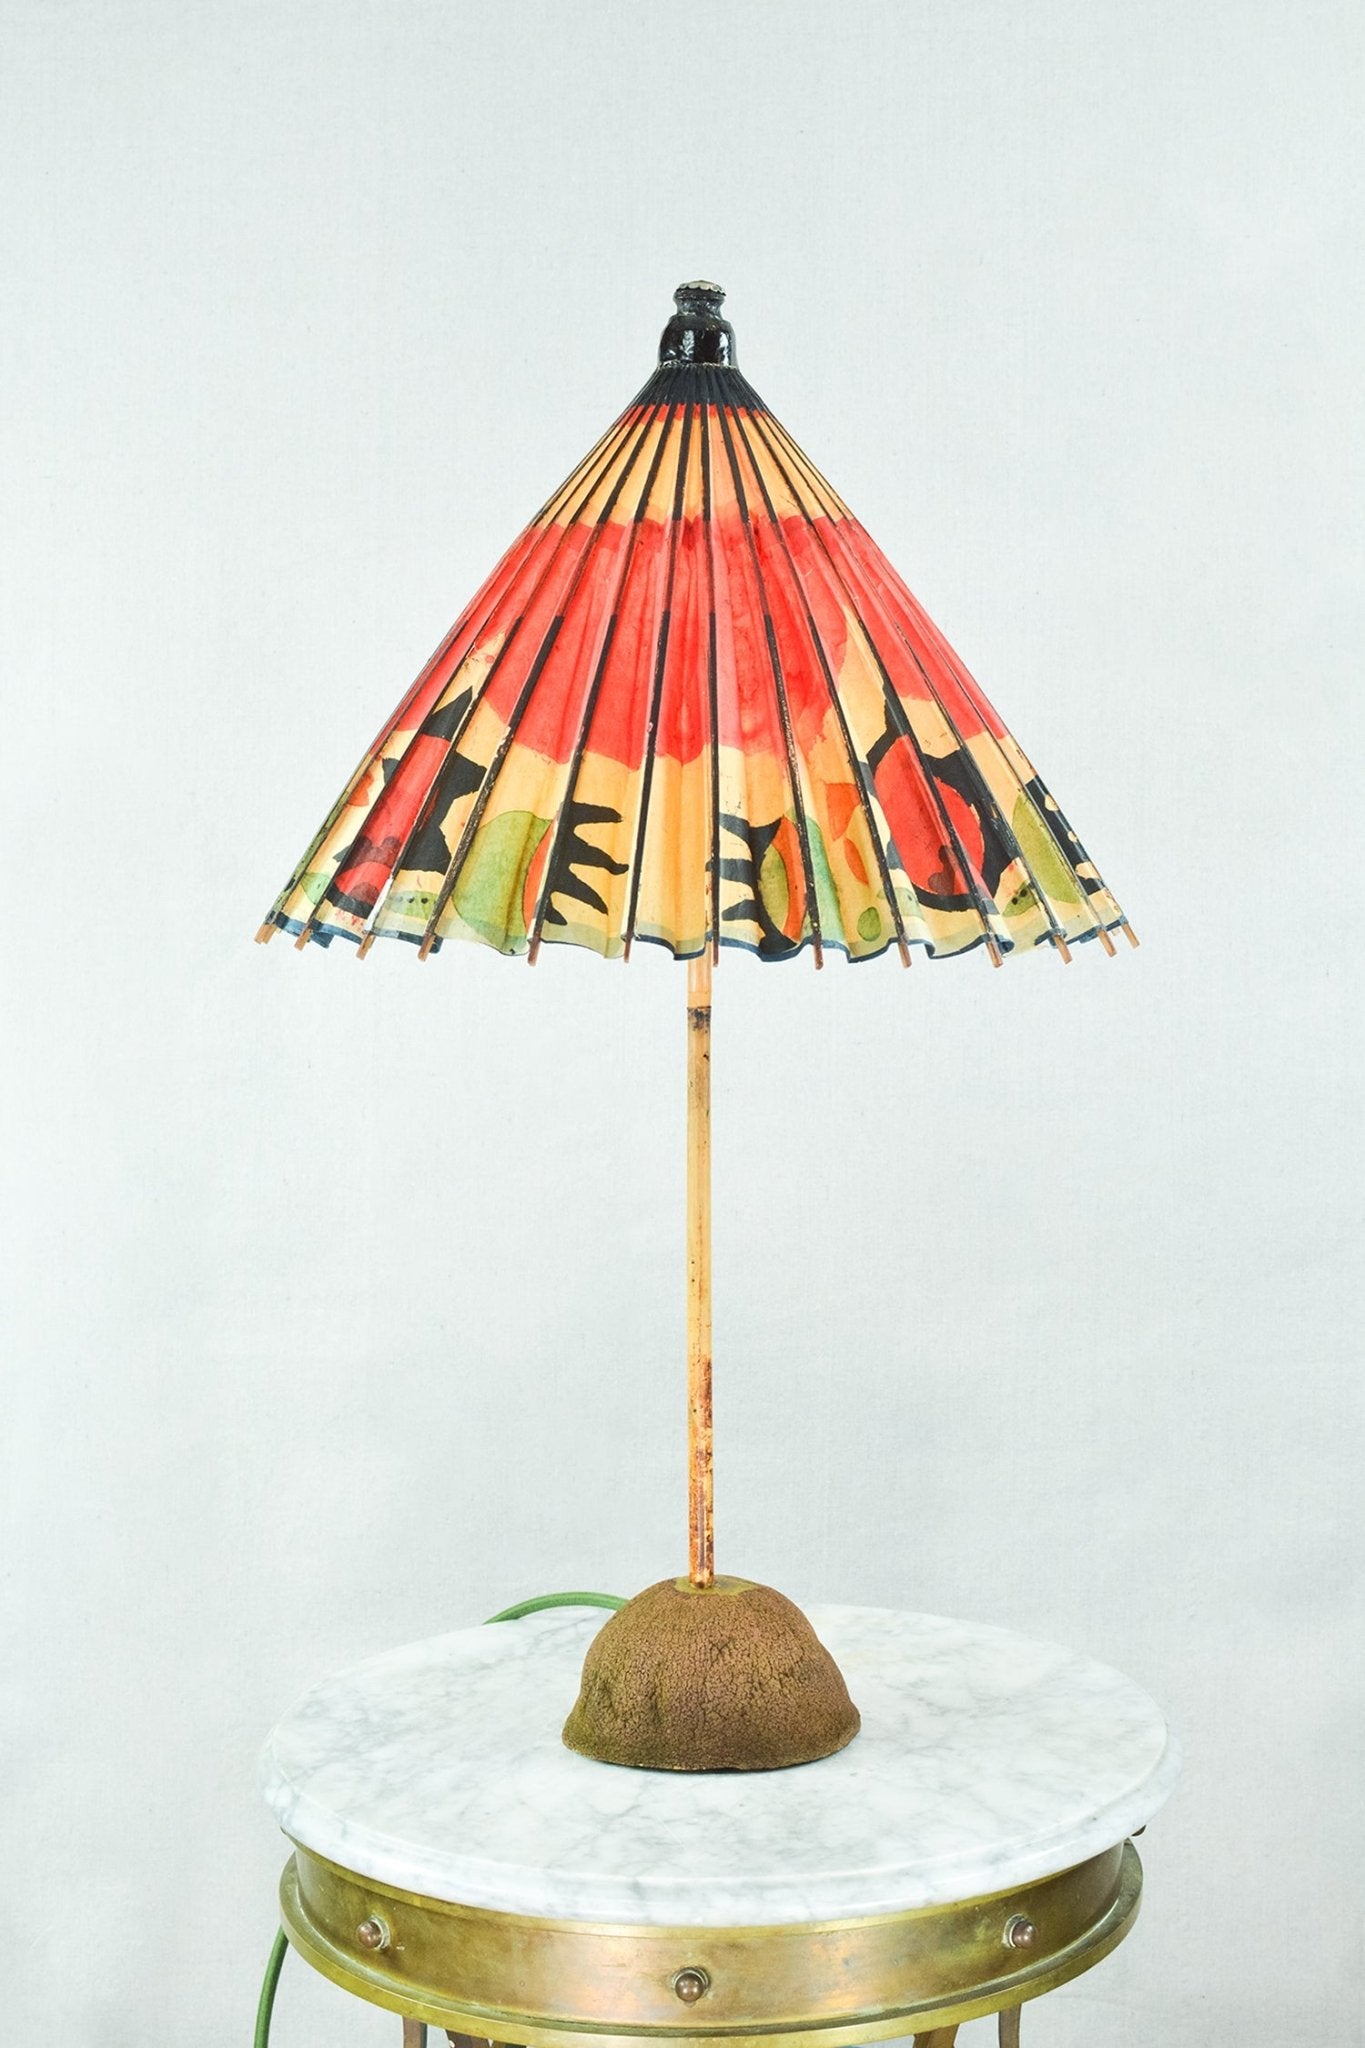 'Prairie Modern' Bamboo Table Lamp with Coconut Base and Vintage Japanese Parasol Shade — Model No. 017 - Tennant New York